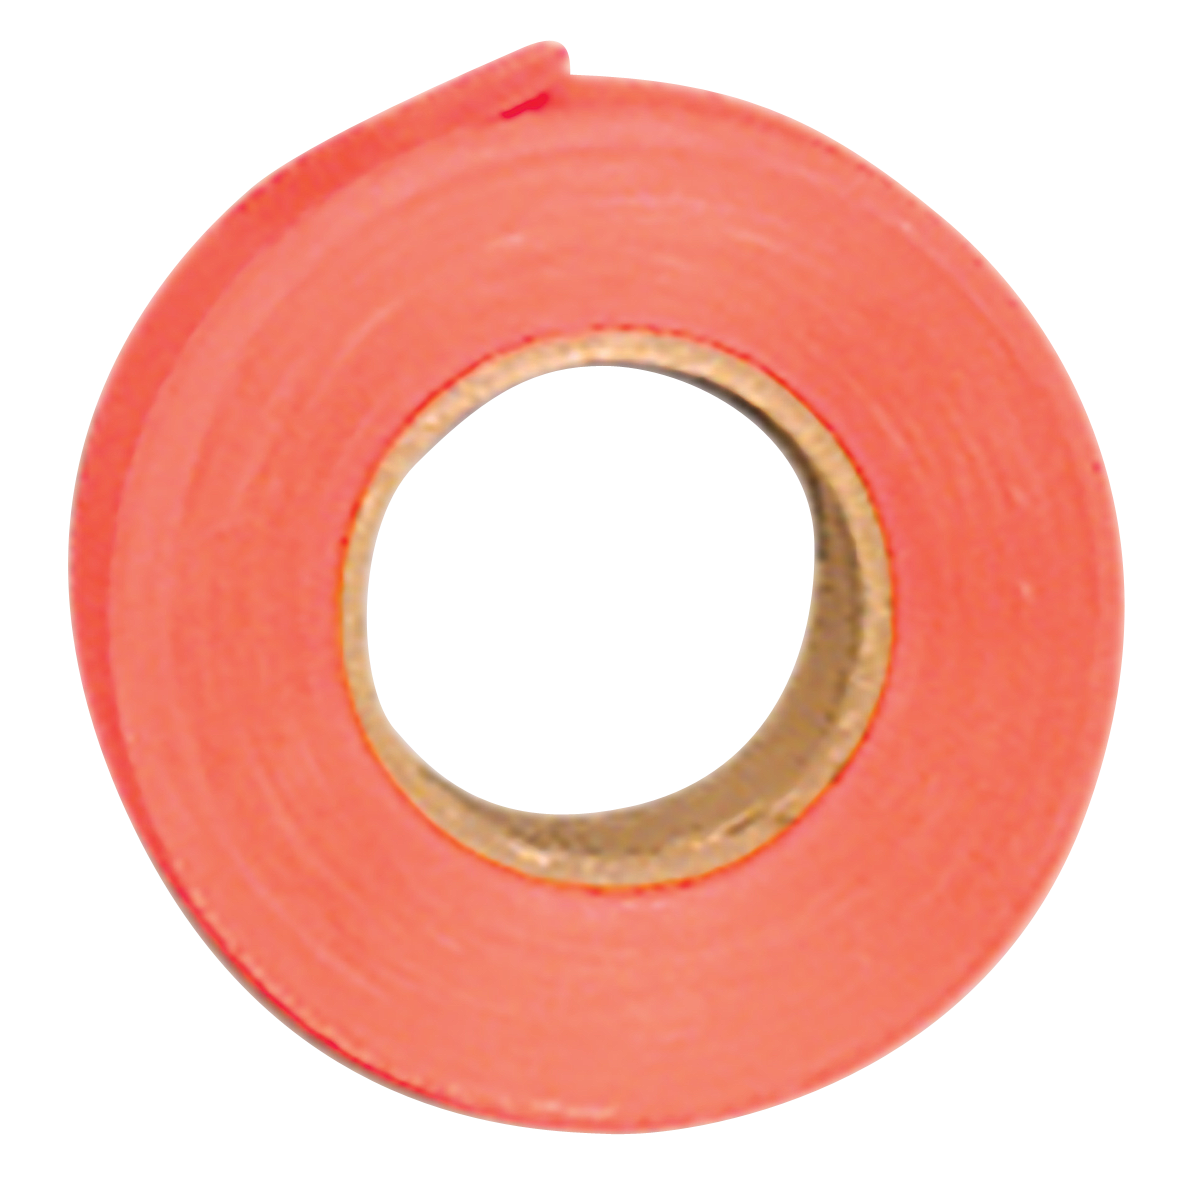 Details about   Lot of 2 Allen Hunting Hiking Trail Marking Flagging Tape 150' Roll ORANGE NEW 